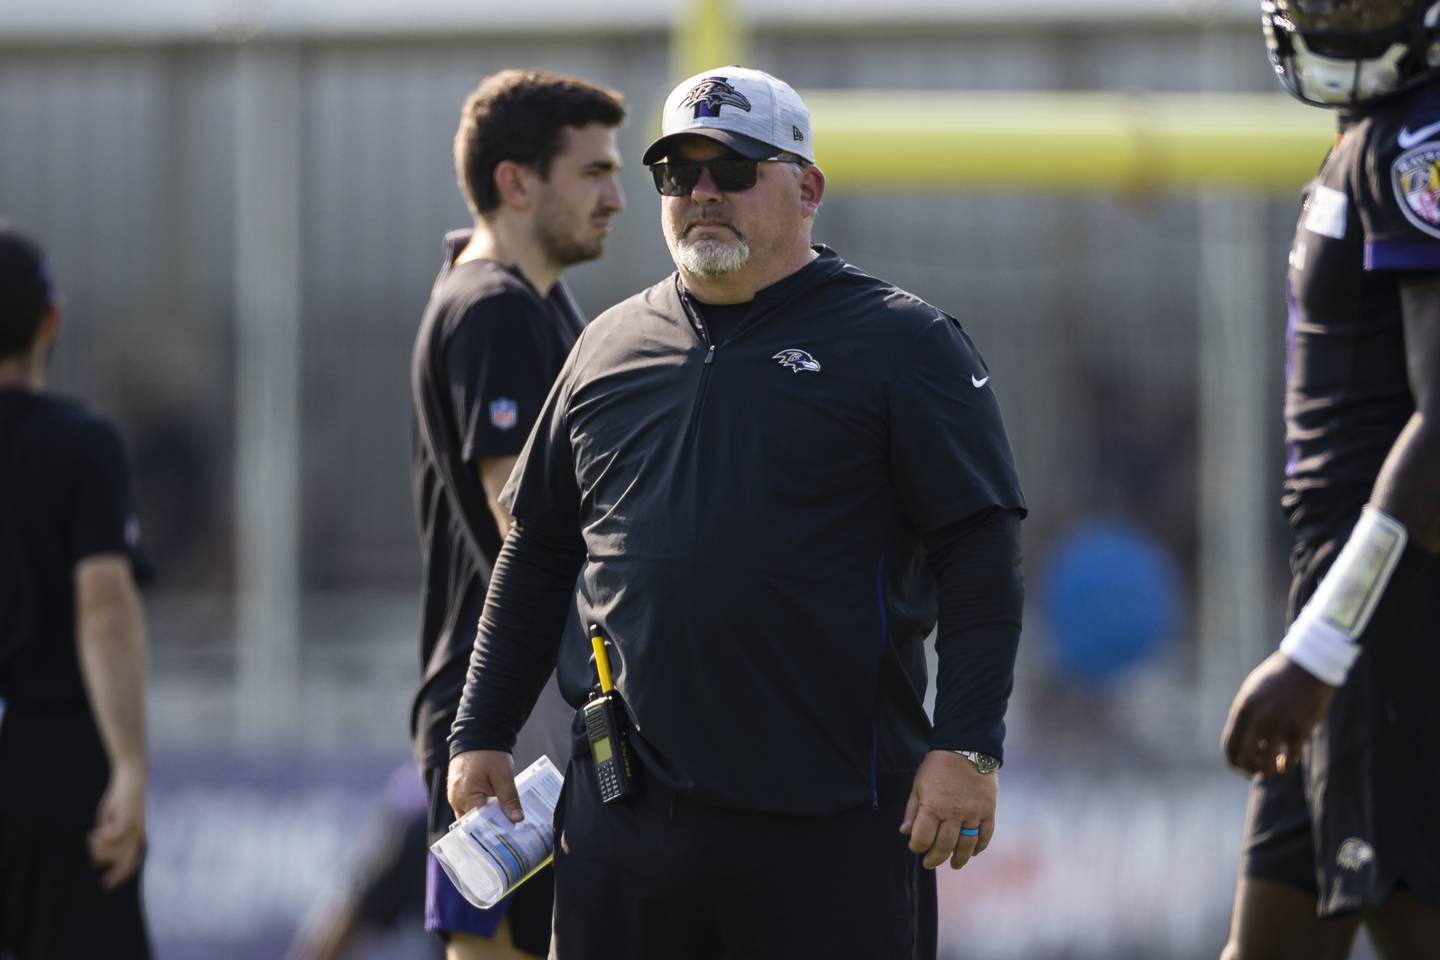 OWINGS MILLS, MD - JULY 28: Offensive coordinator Greg Roman of the Baltimore Ravens watches play during training camp at Under Armour Performance Center Baltimore Ravens on July 28, 2021 in Owings Mills, Maryland.